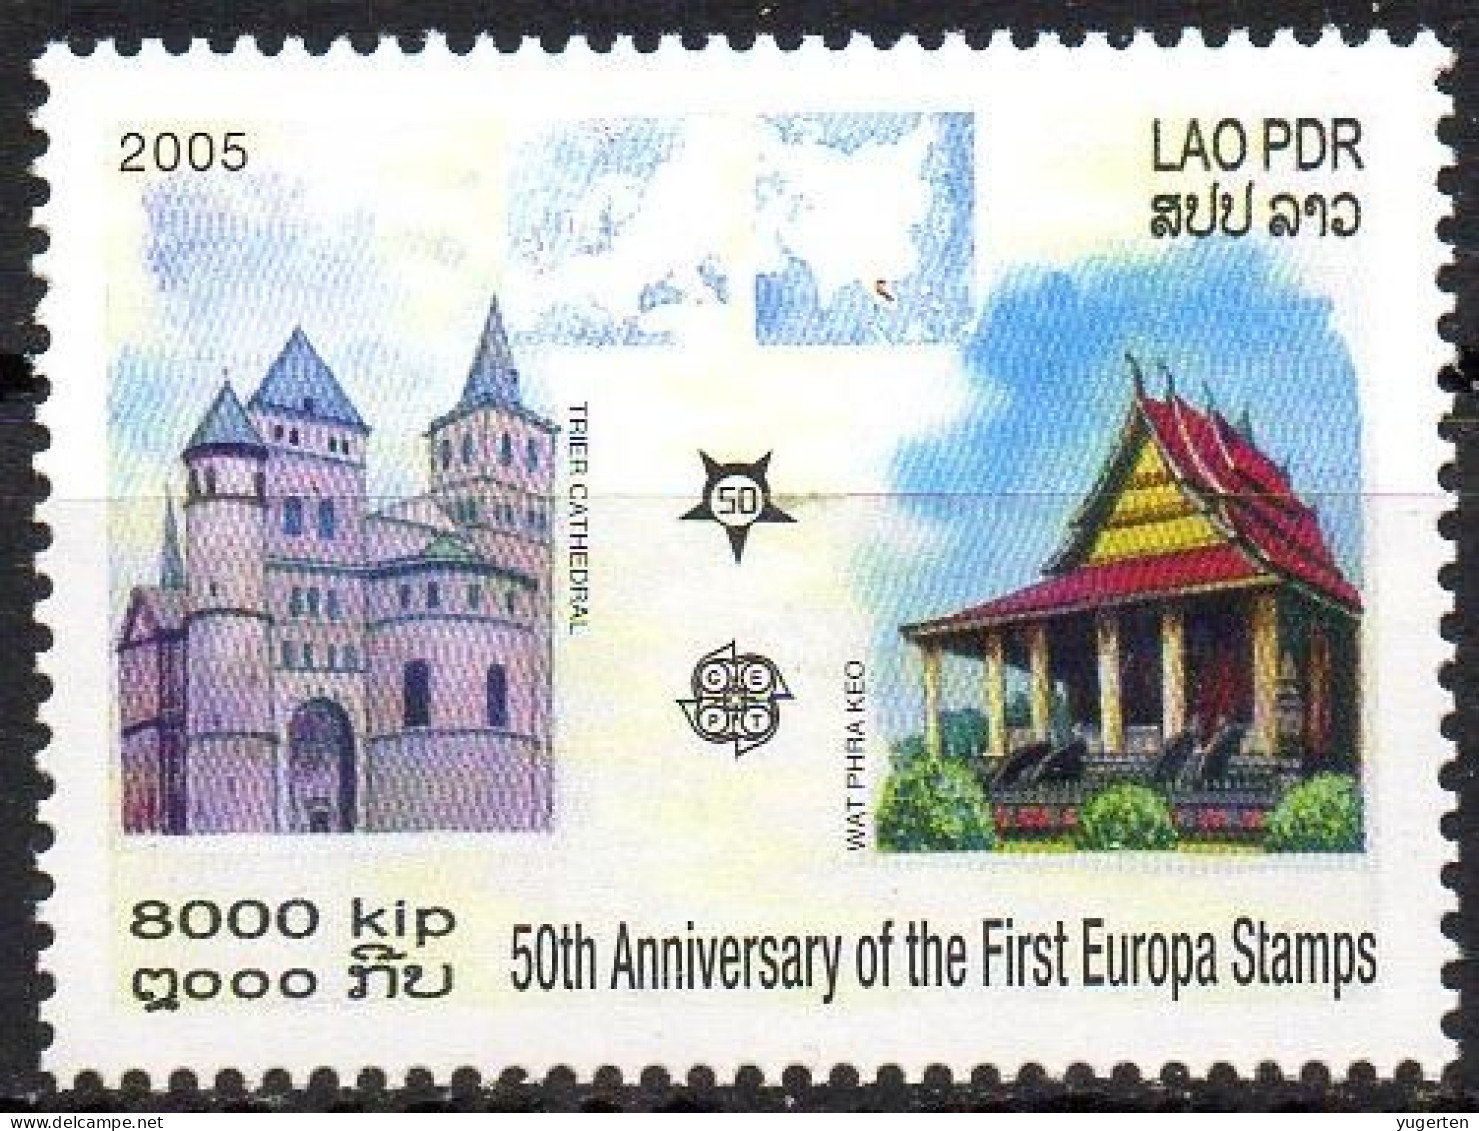 LAOS 2005 - 1v - MNH - The 50 Years Anniv. Of The First EUROPA Stamps - Chateau - Architecture Castle Castillo Schloss - Emissions Communes